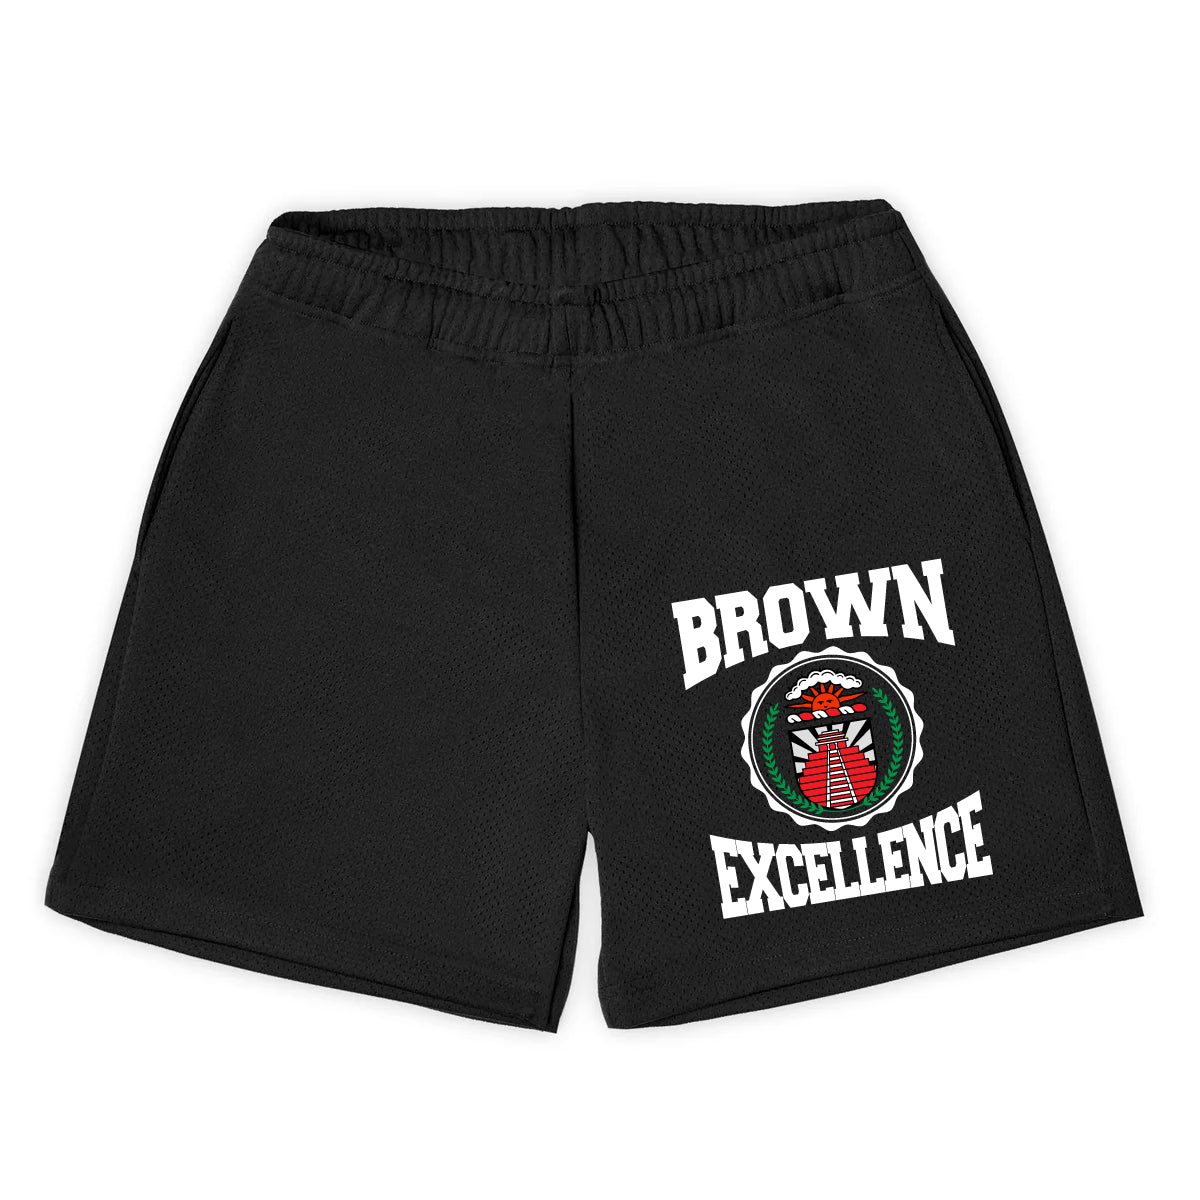 BROWN EXCELLENCE MESH SHORTS - BLACK